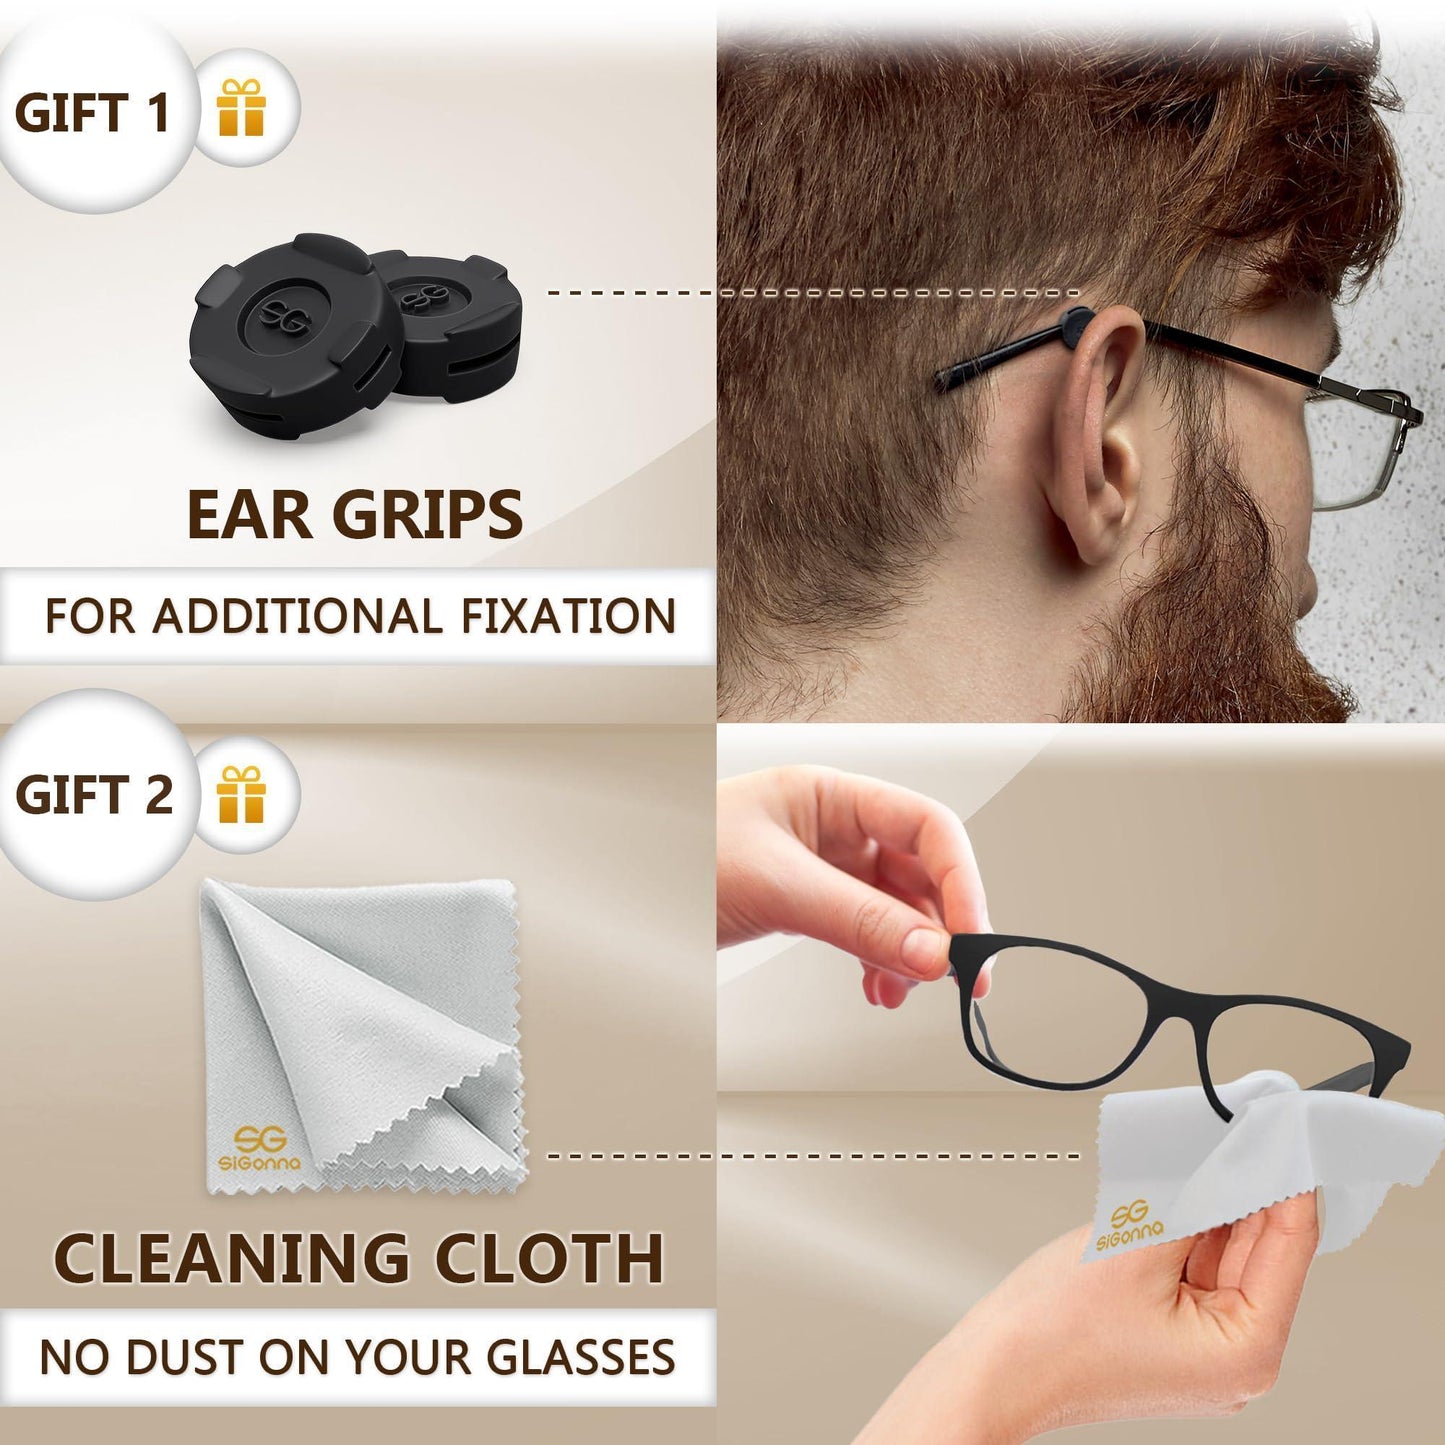 Eye Glasses Nose Pads Non Slip - 1 mm x 7 mm x 16mm Adhesive Glasses Nose Grip Non Slip - Silicone Eyeglass Nose Pads Soft Cushion - 6 Pairs Nose Grips - Glasses Accessories Anti-Slip - Loomini